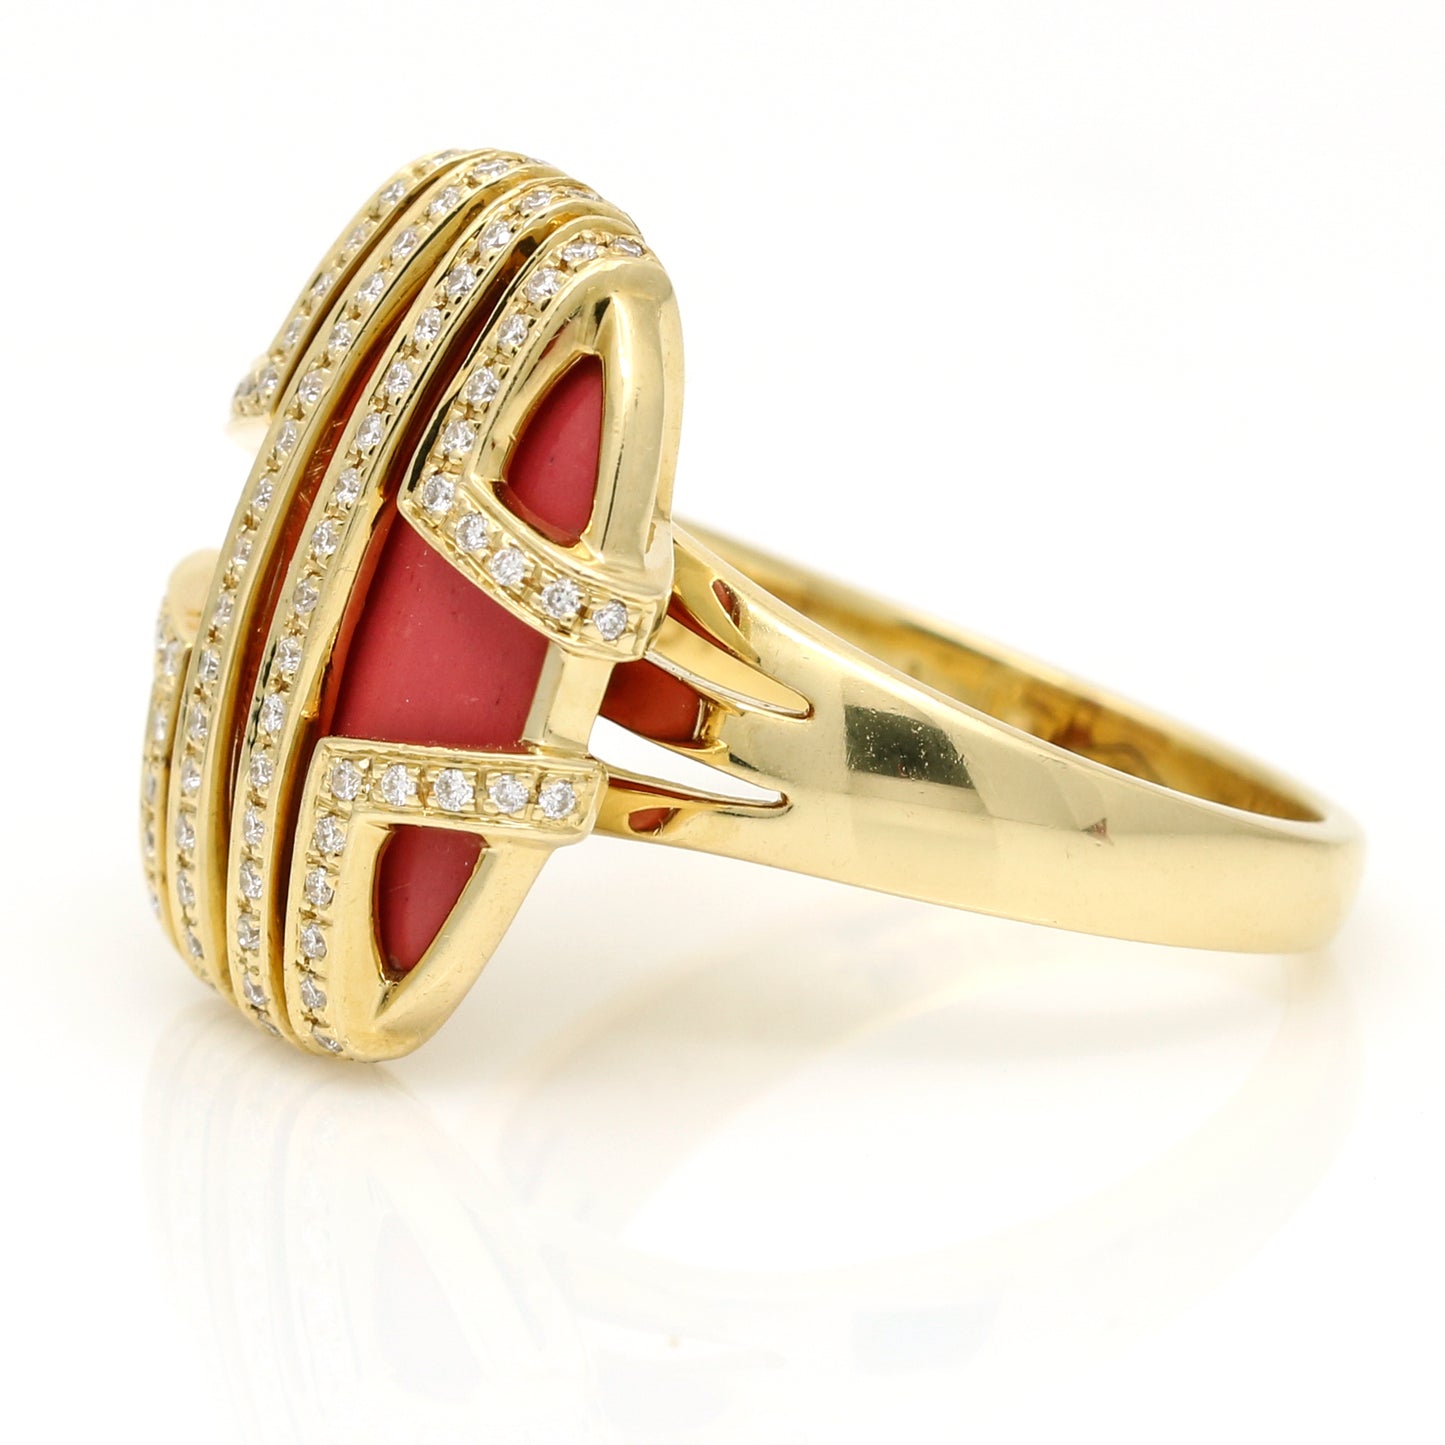 DiModolo Favola Coral and Diamond Ring in 18k Yellow Gold